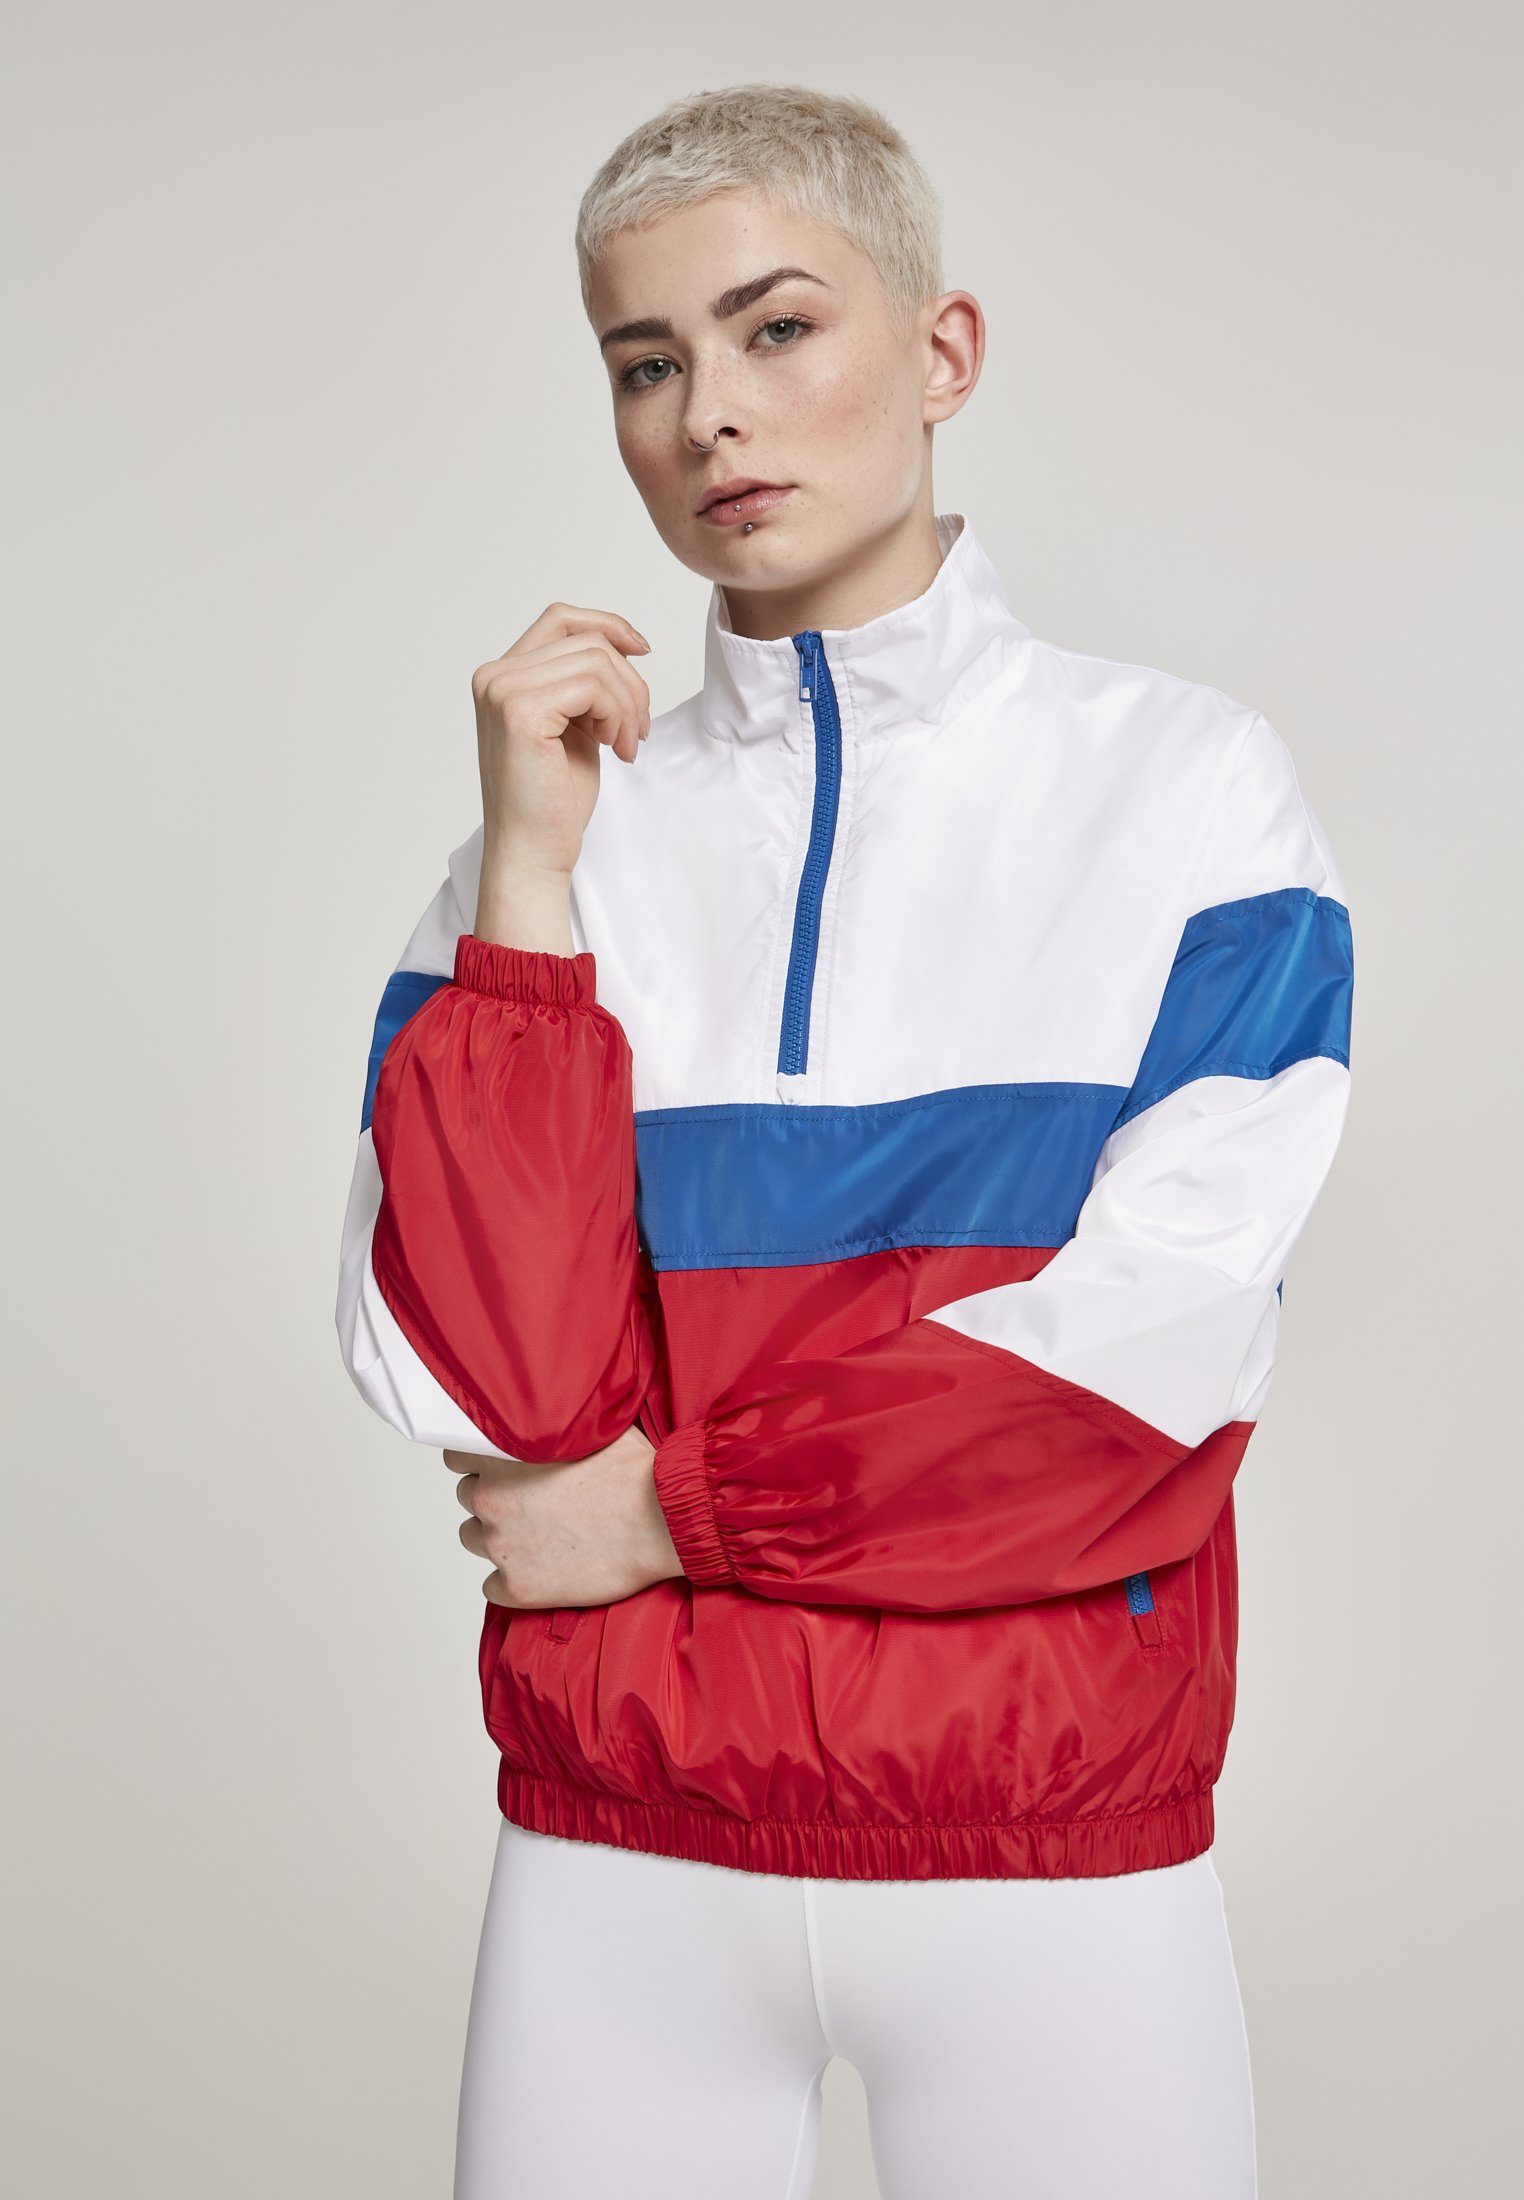 URBAN white/firered/brightblue Damen Ladies 3-Tone Outdoorjacke Stand Up Over CLASSICS Jacket (1-St) Collar Pull